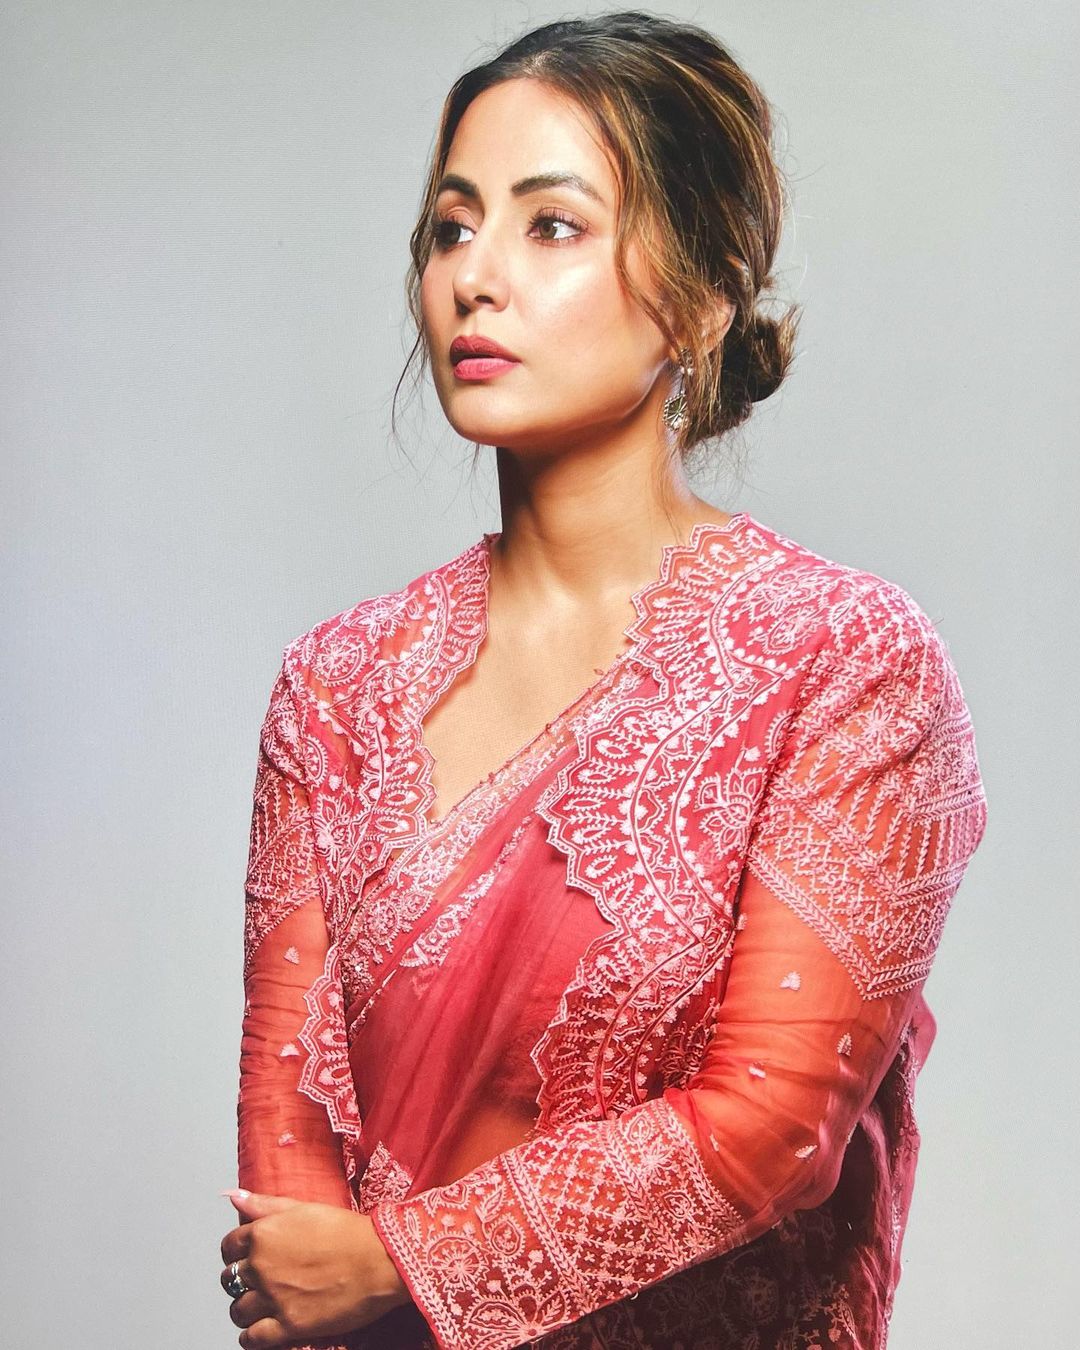 Hina Khan looks regal in the embroidered saree.